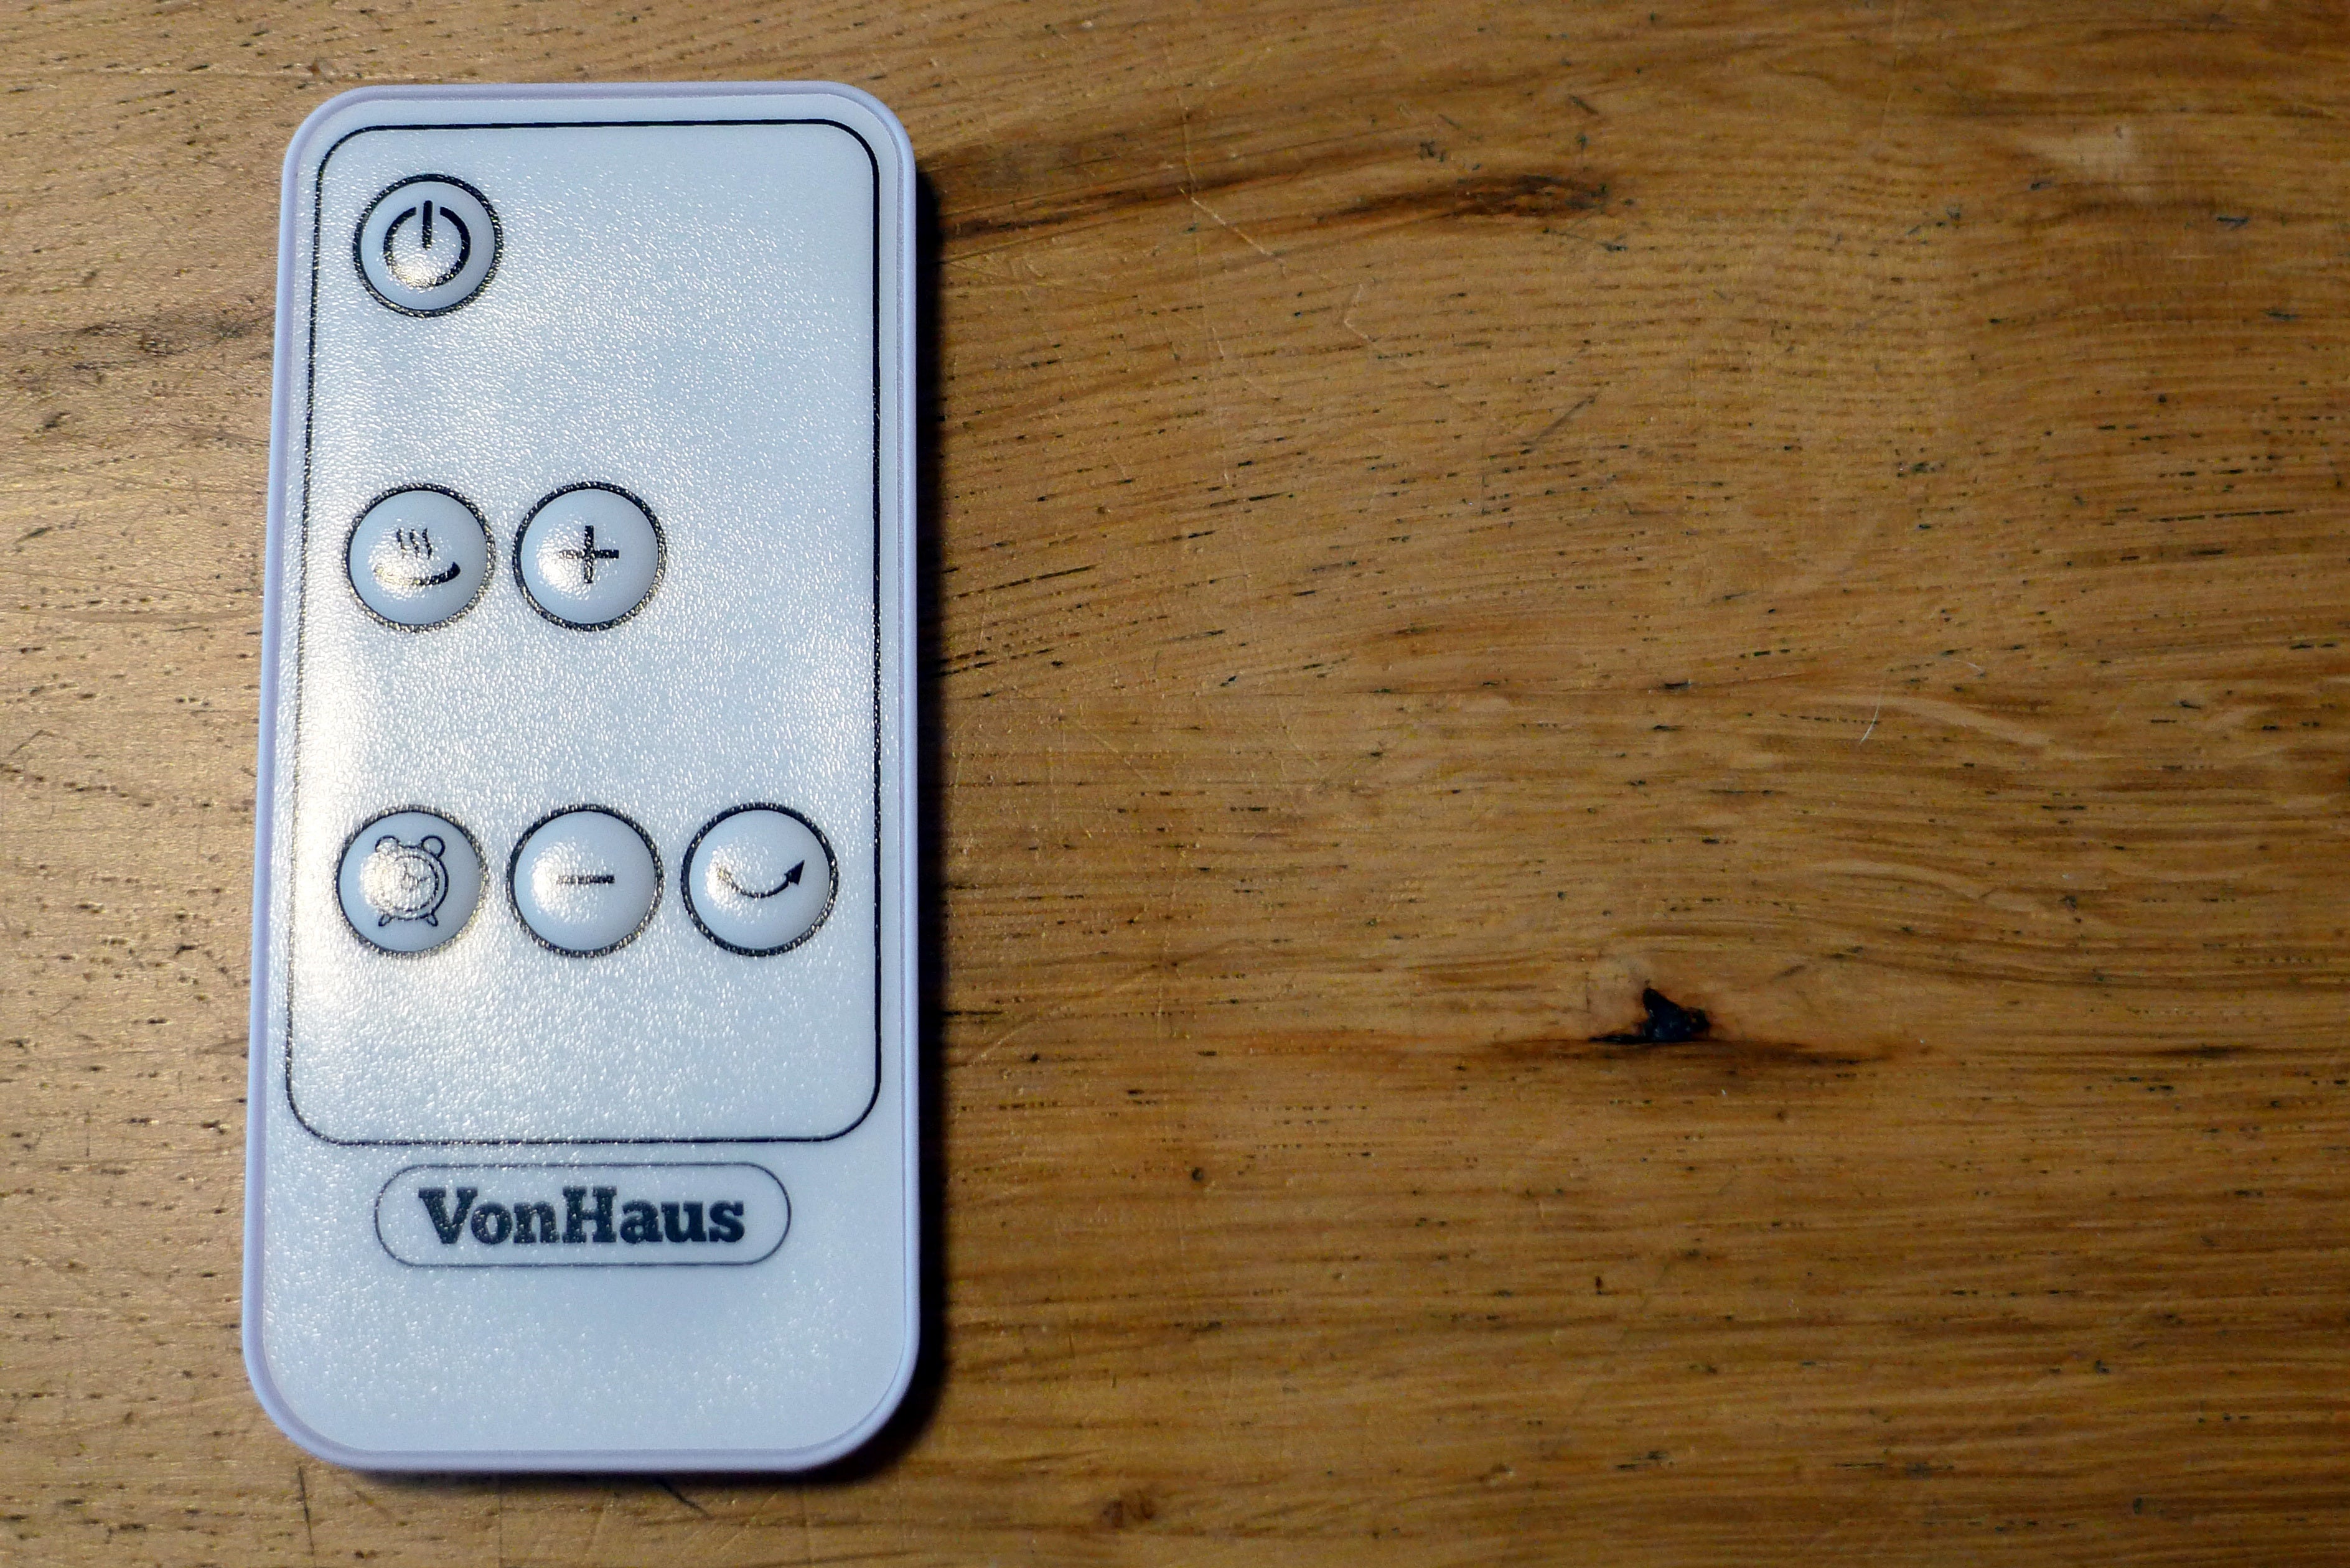 A white VonHaus fan heater's remote kept on a table